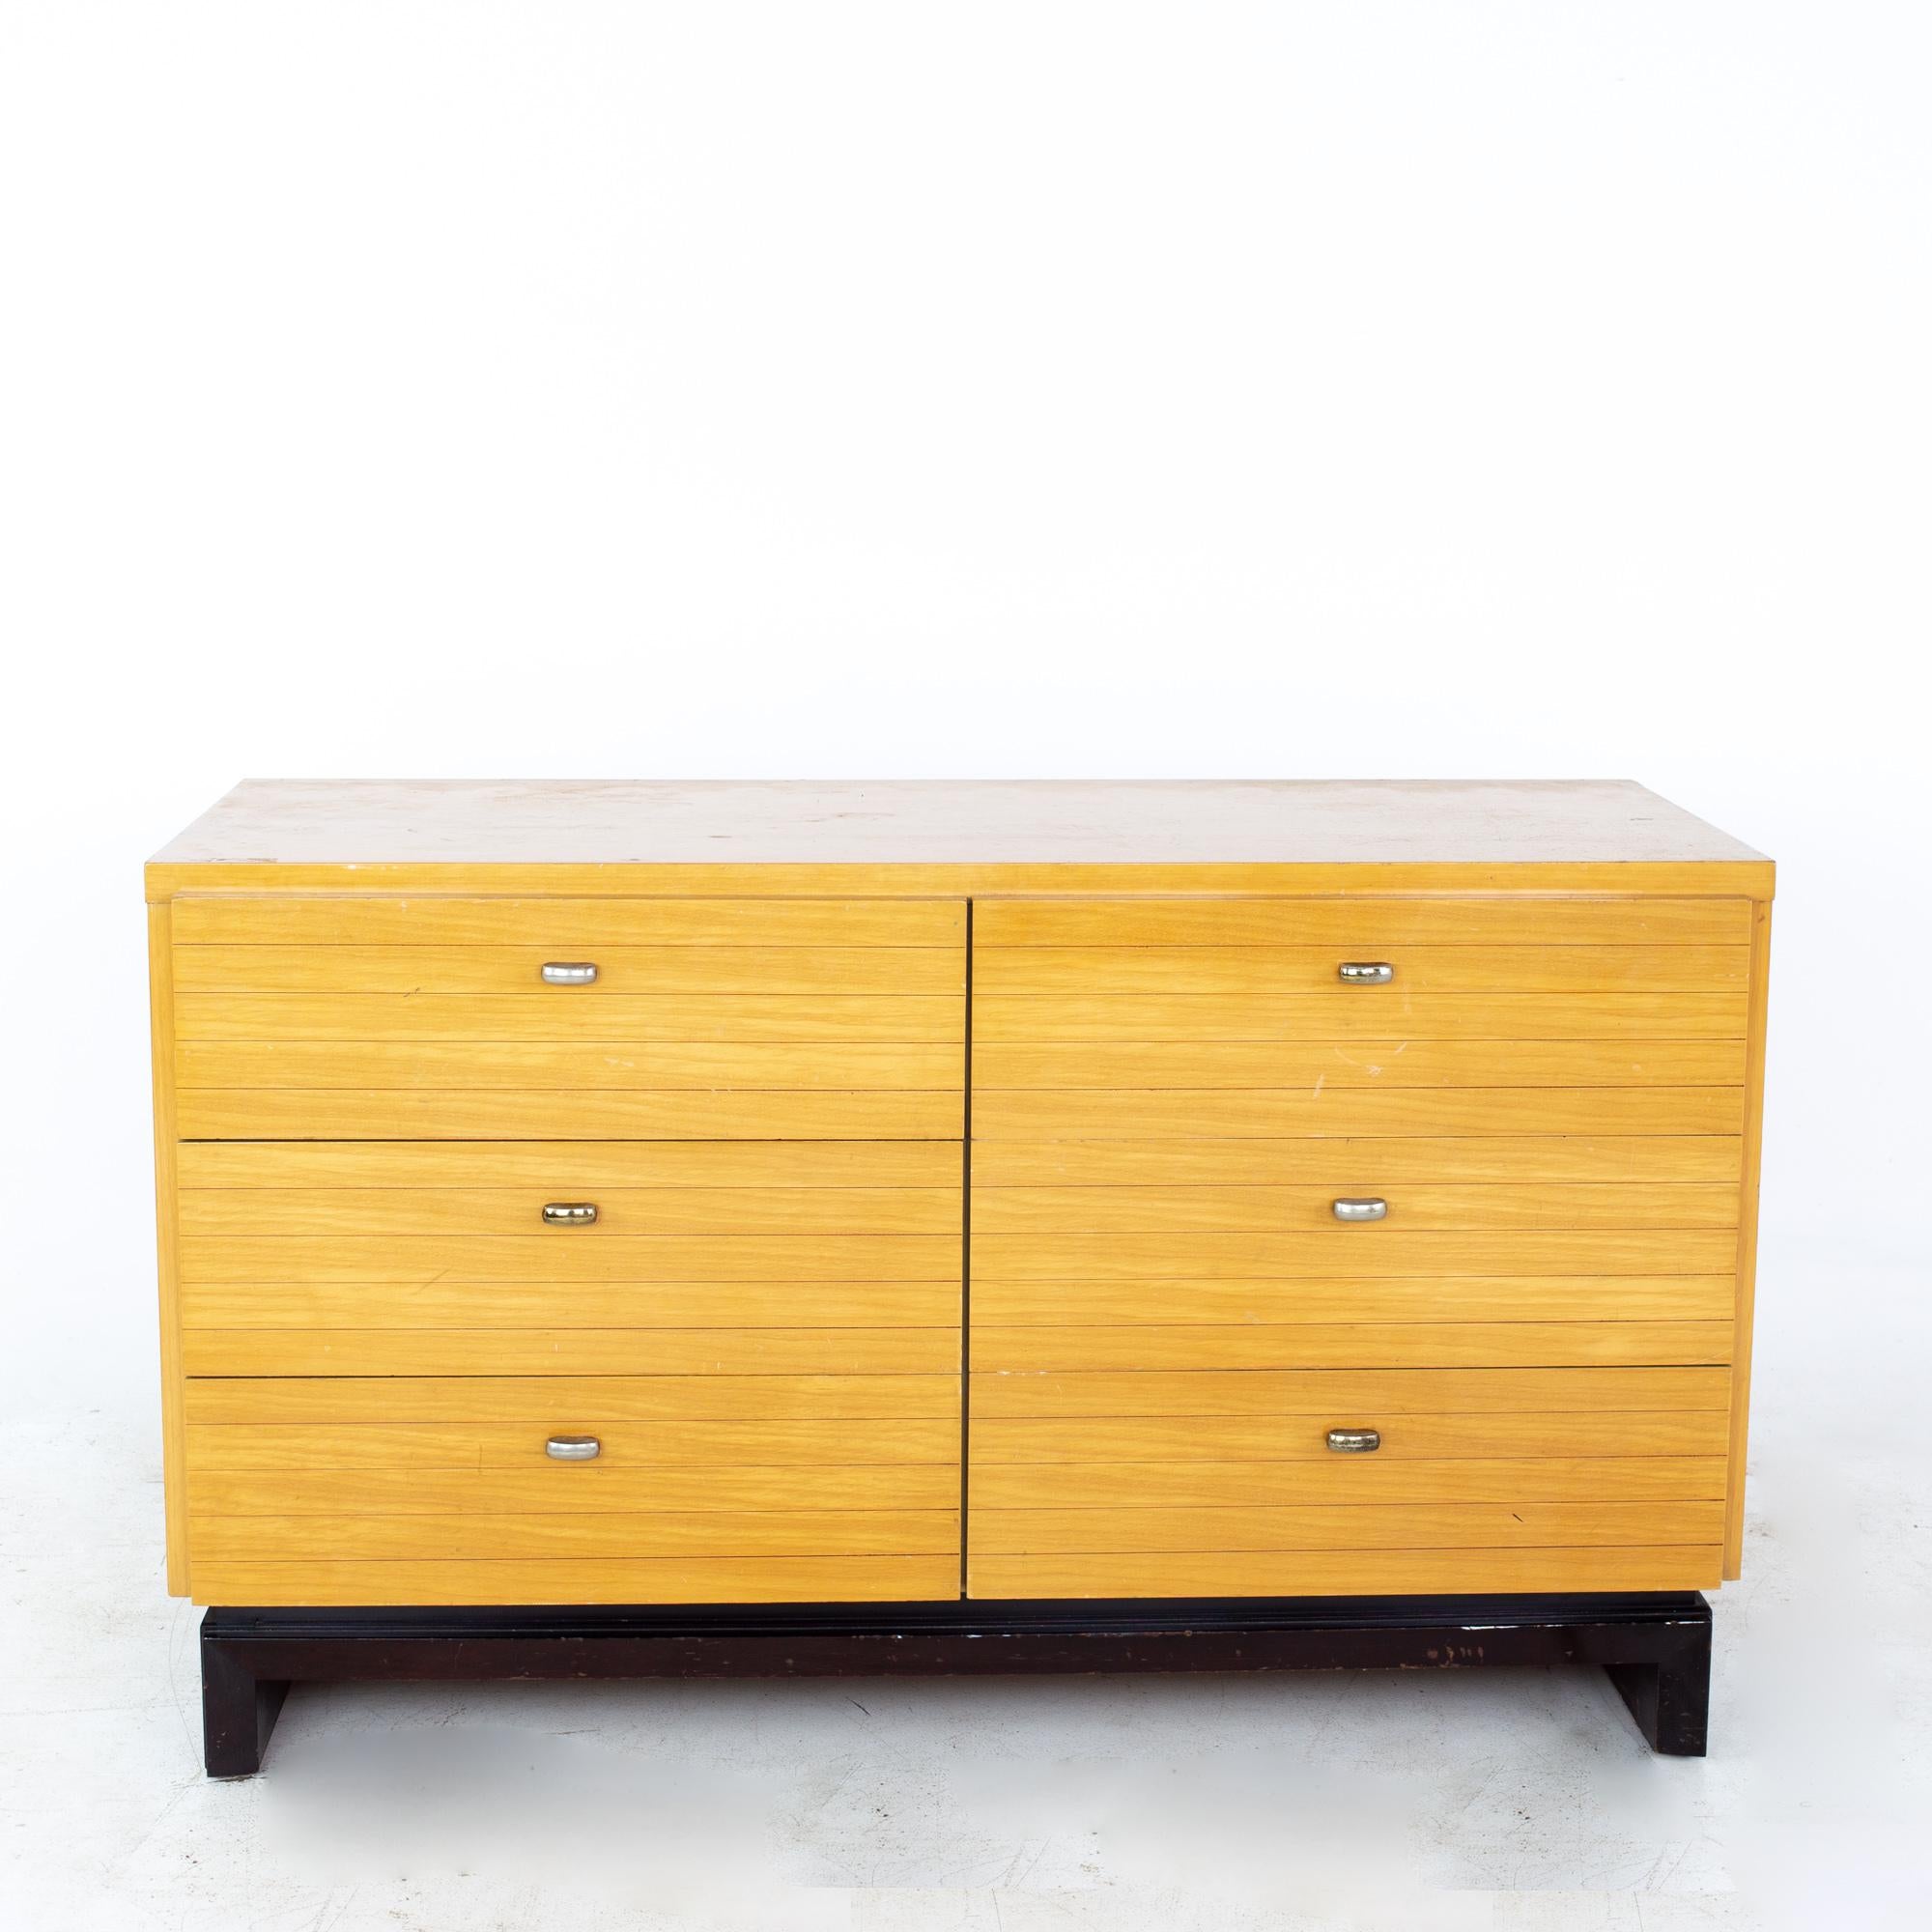 Milo Baughman style American of Martinsville mid century blonde 6 drawer lowboy dresser
Dresser measures: 52.25 wide x 20.5 deep x 31.75 inches high

All pieces of furniture can be had in what we call restored vintage condition. That means the